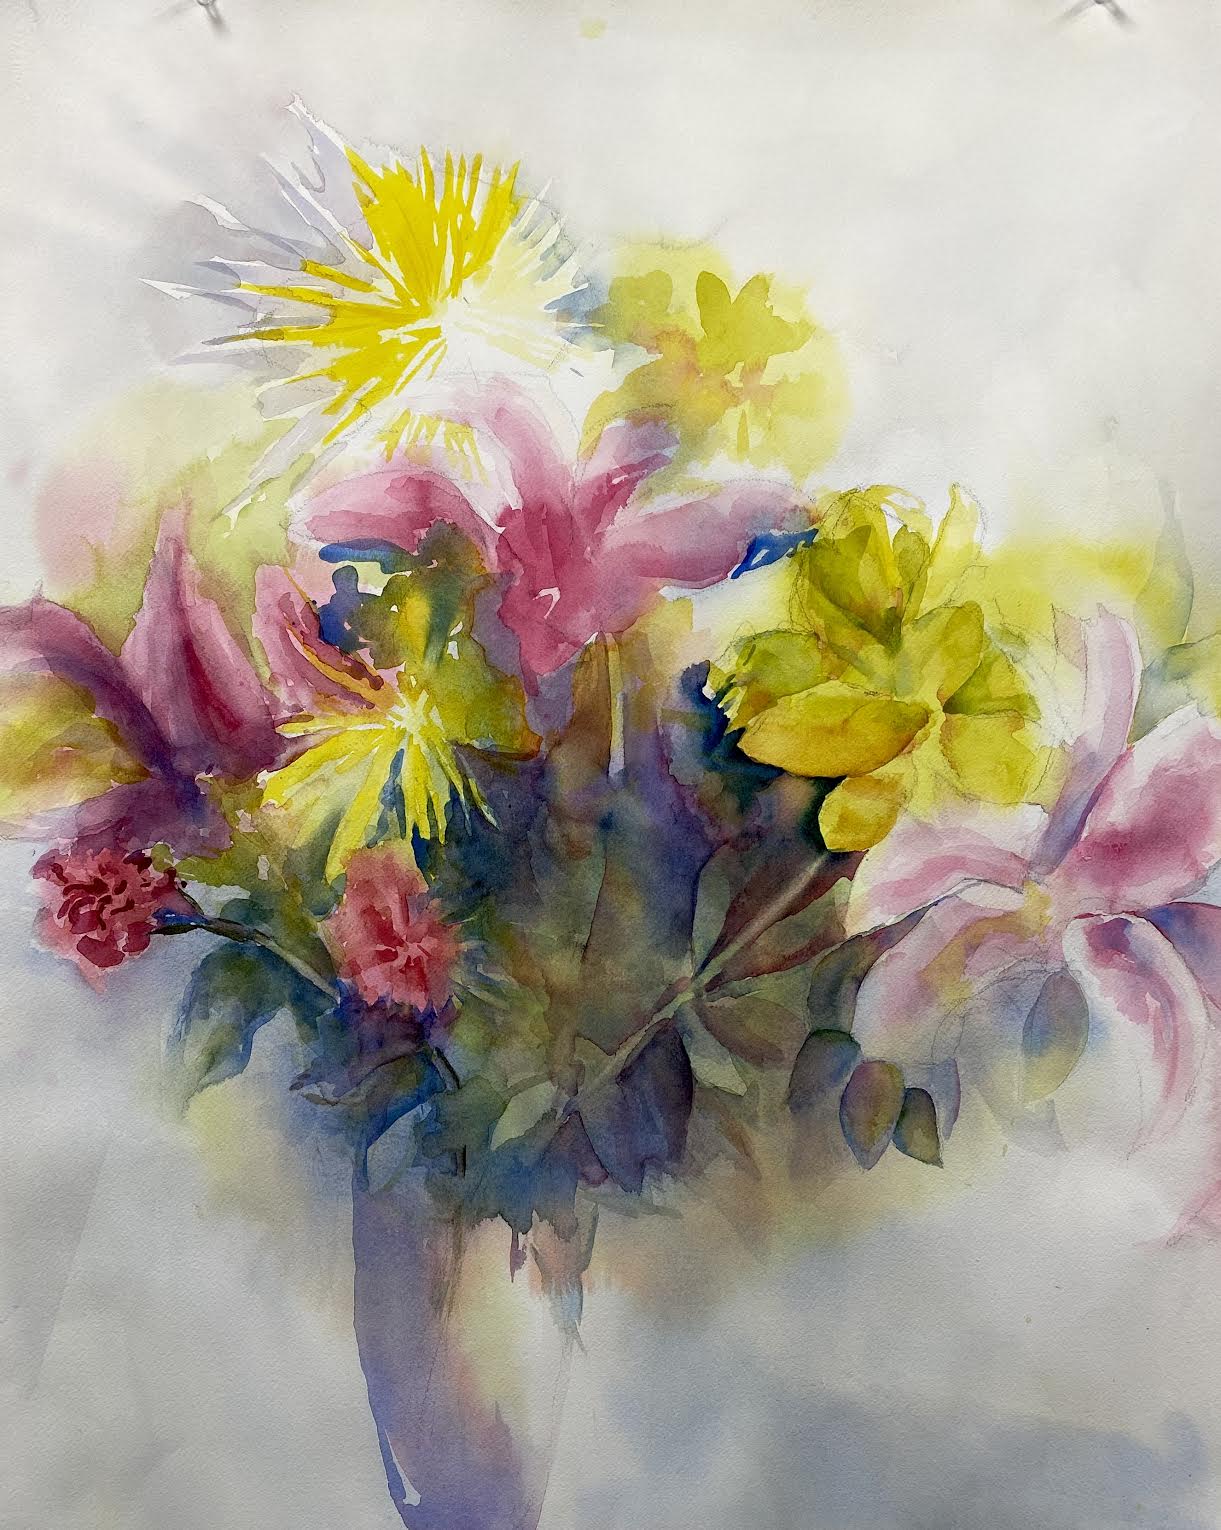 Painting Florals in Watercolor